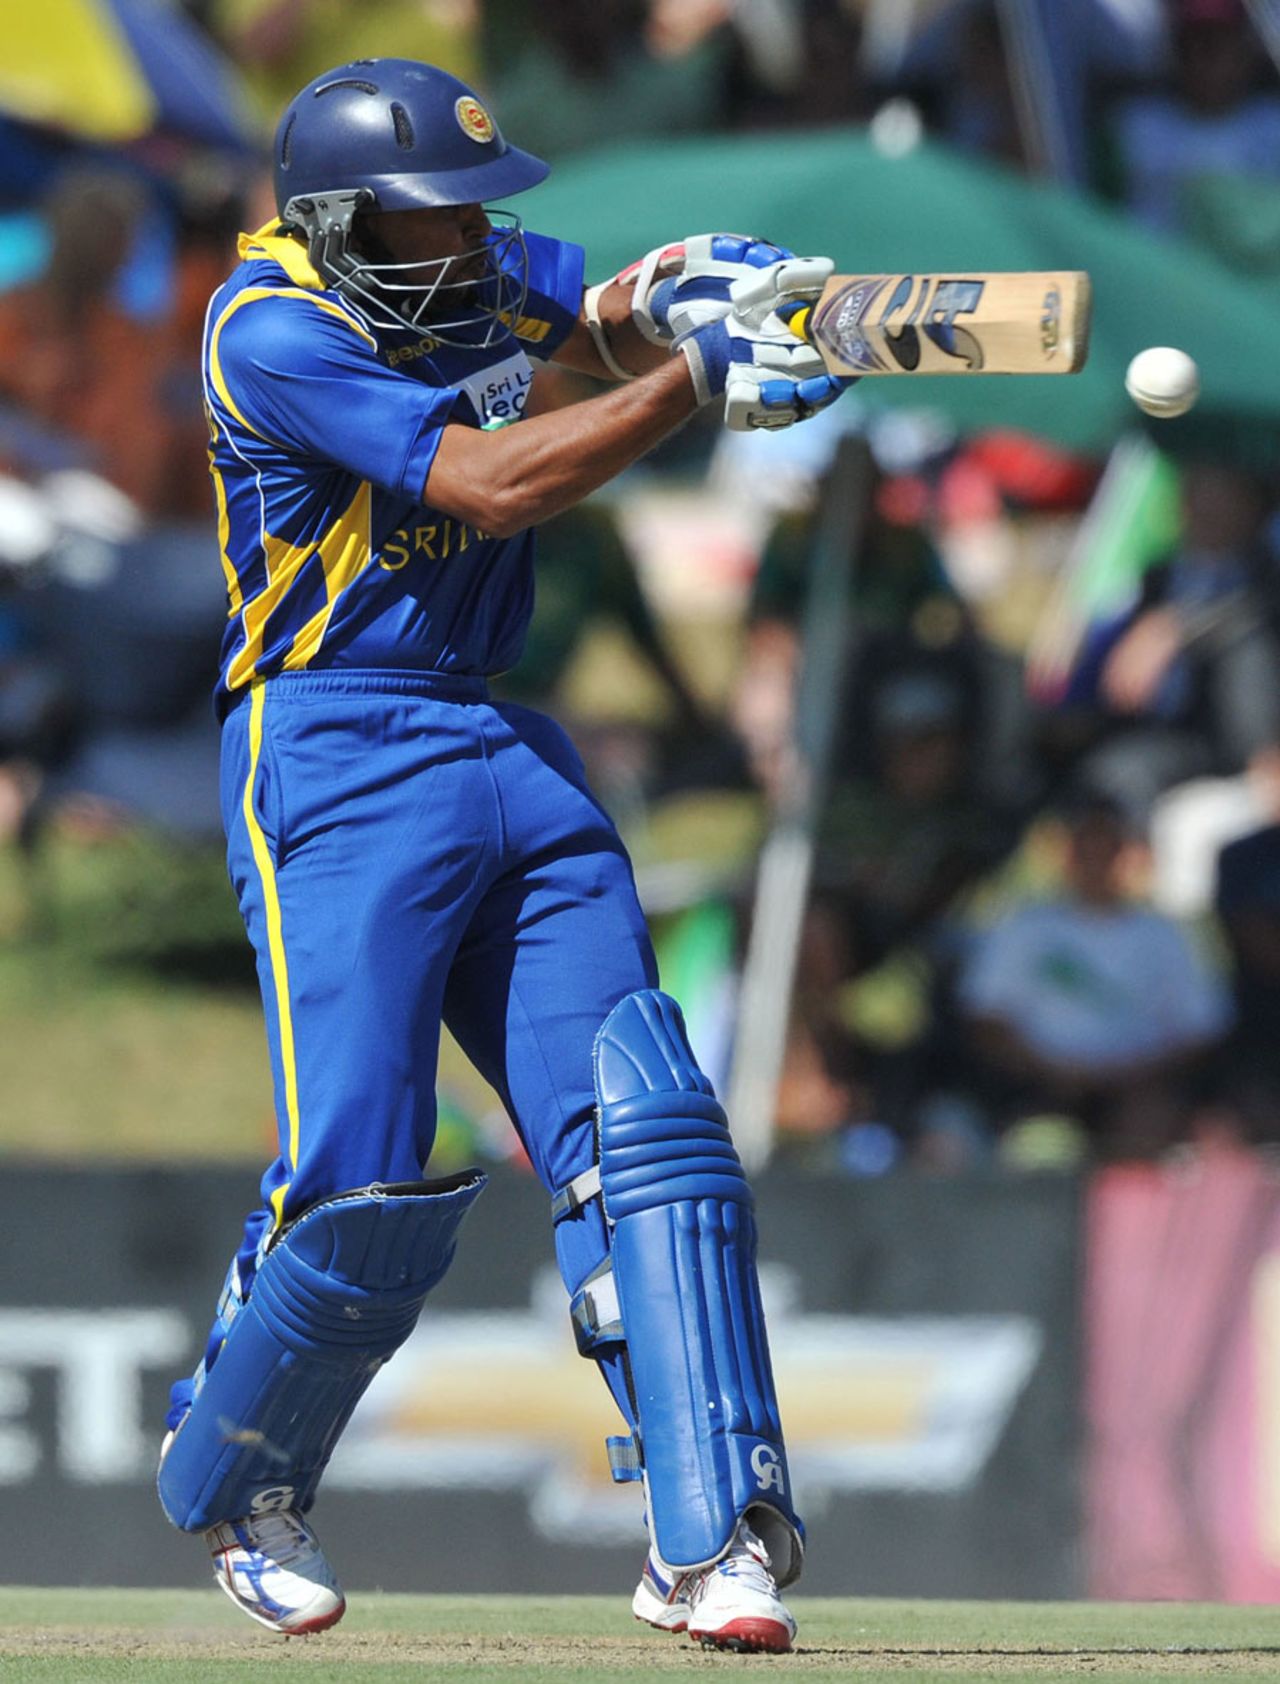 After ducks in the first two ODIs, Tillakaratne Dilshan made his first runs of the series, South Africa v Sri Lanka, 3rd ODI, Bloemfontein, January 17, 2012